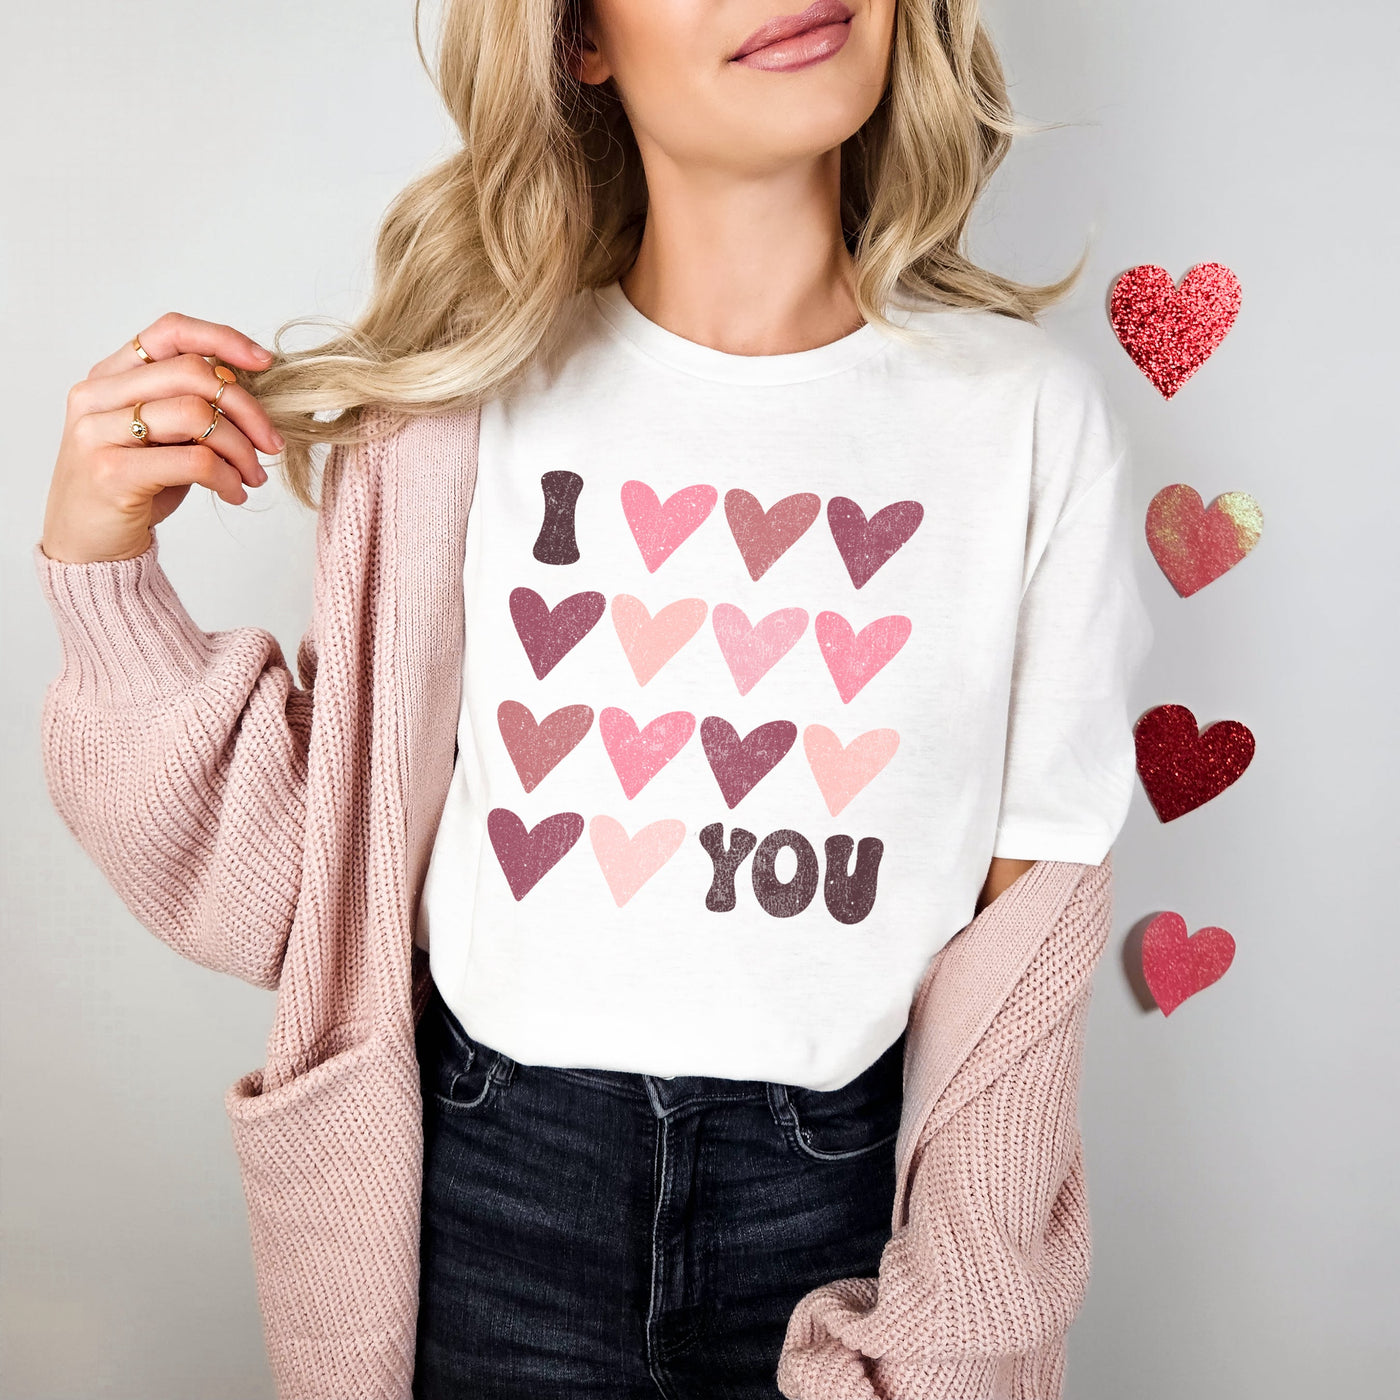 NOT SO PLAIN JANE Design Co. | I Love Love Love You Comfort Tee and Sweatshirt, The Local Space, Local Canadian Brands